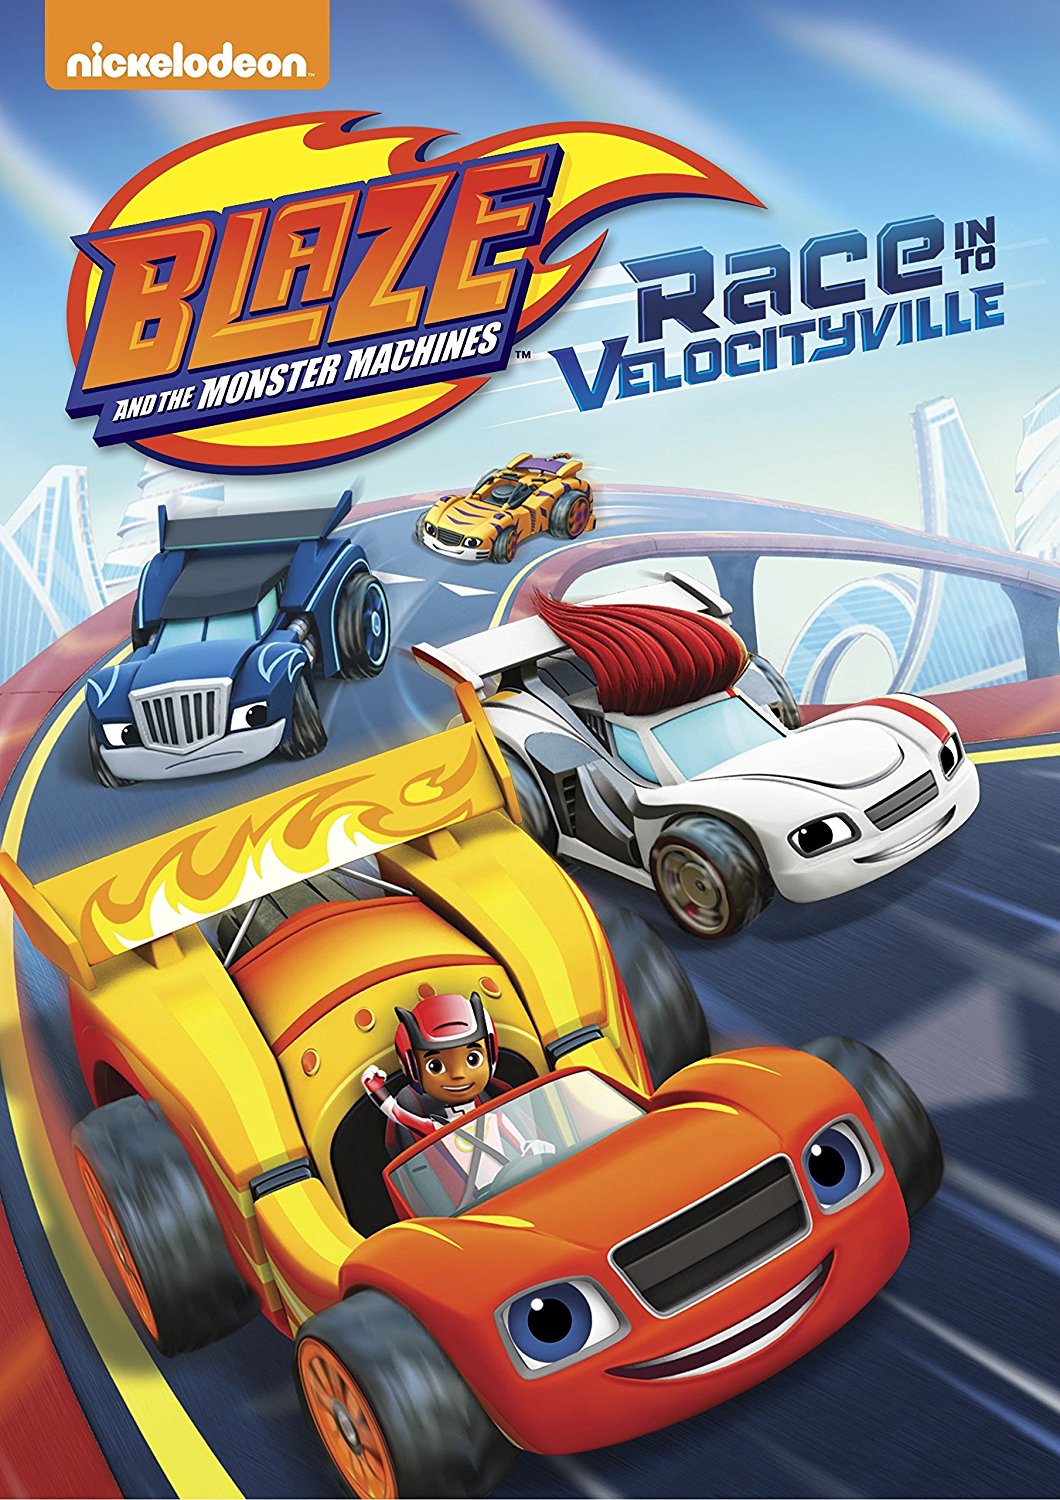 Blaze and the Monster Machines: Race Into VelocityVille. 